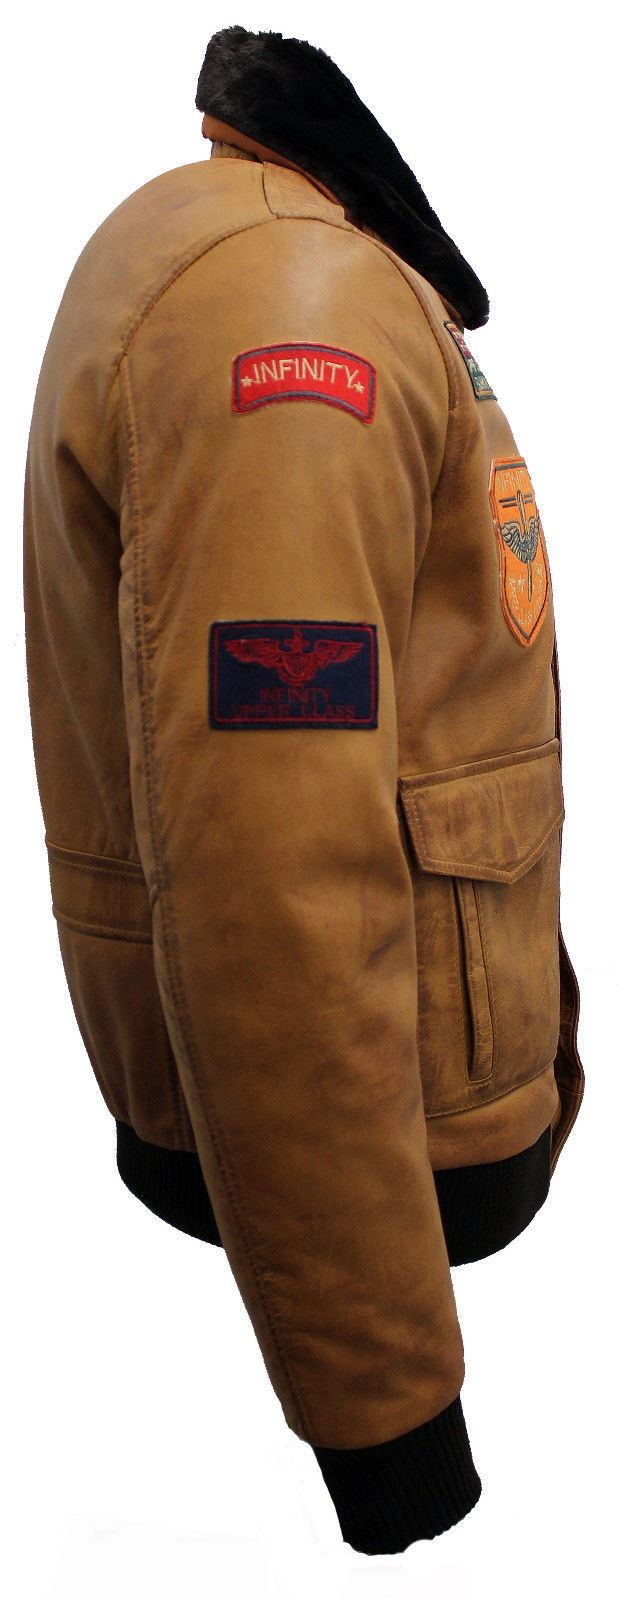 Mens Nappa Leather Bomber Jacket-Colburn in Tan - Upperclass Fashions 